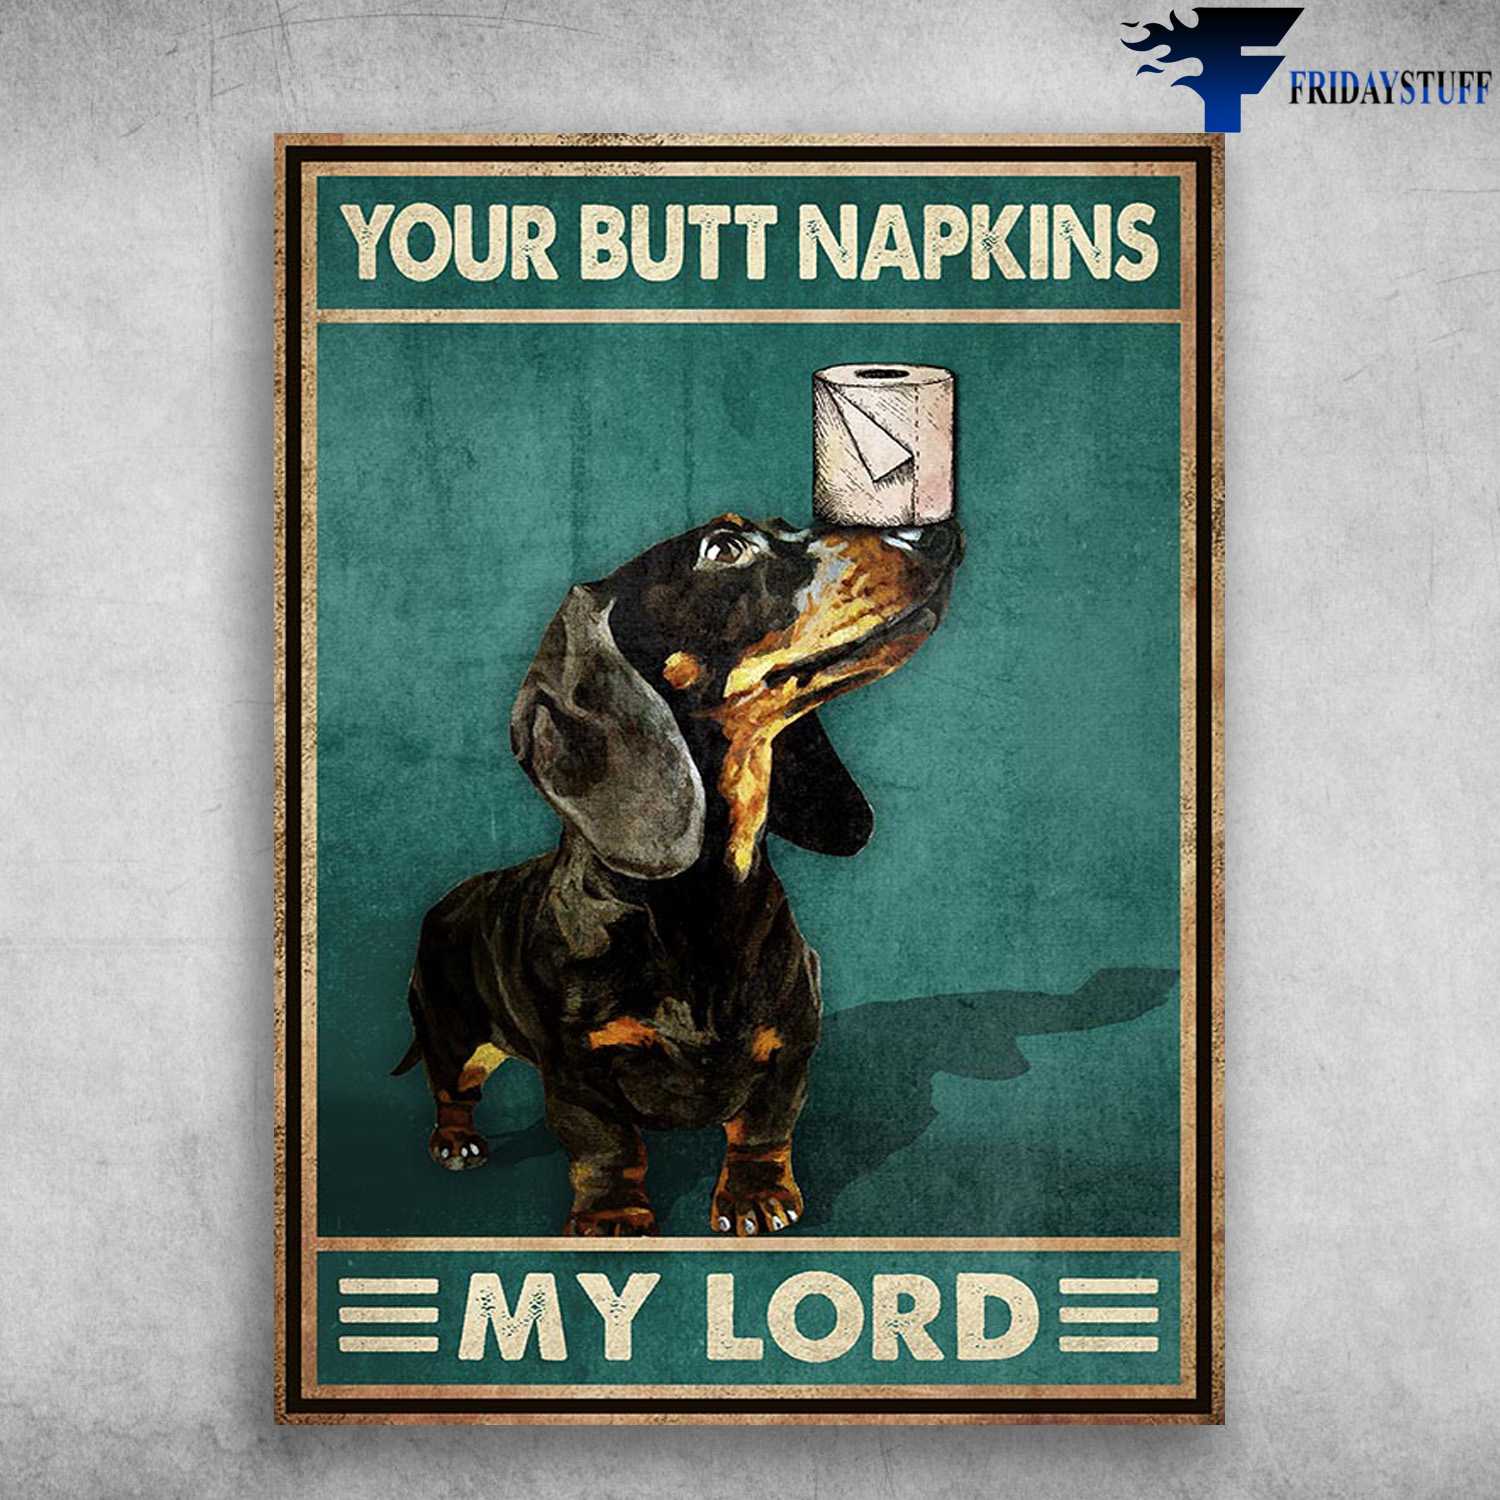 Dachshund Dog, Tolet Poster - Your Butt Napkins, My Lord